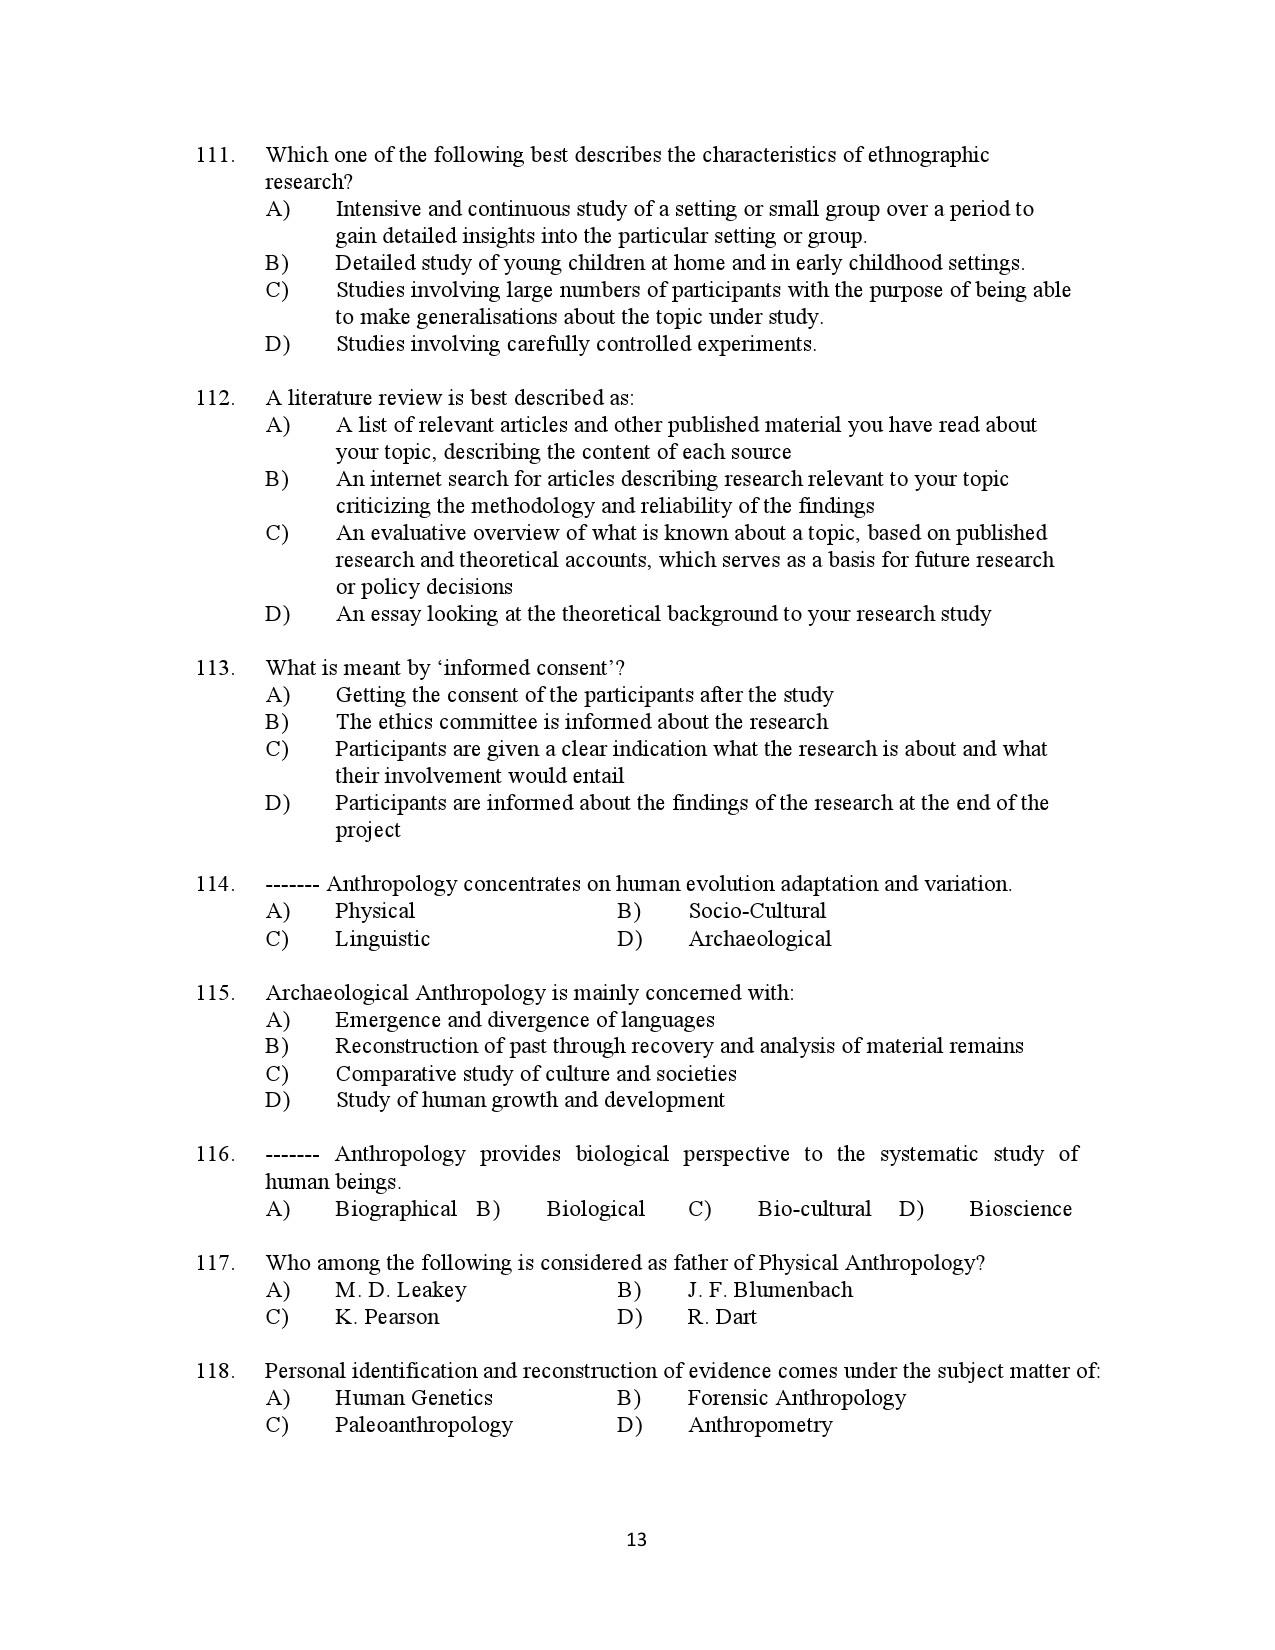 Kerala SET Anthropology Exam Question Paper July 2022 13